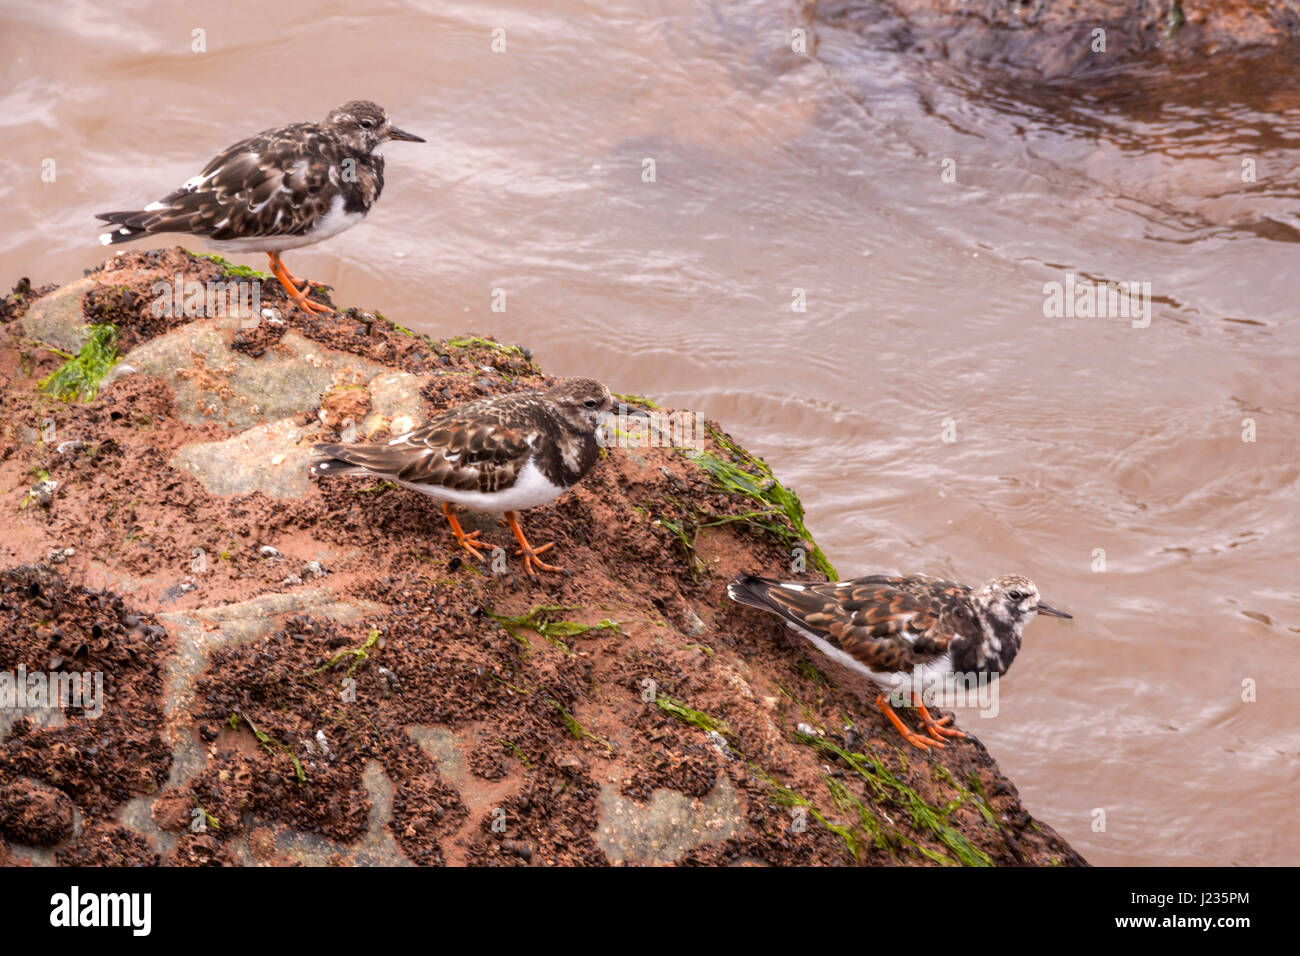 A family of turnstones, well camouflaged, hiding amongst the rocks in Sidmouth, Devon. Turnstone, bird, Arenaria interpres, sandpiper. Stock Photo